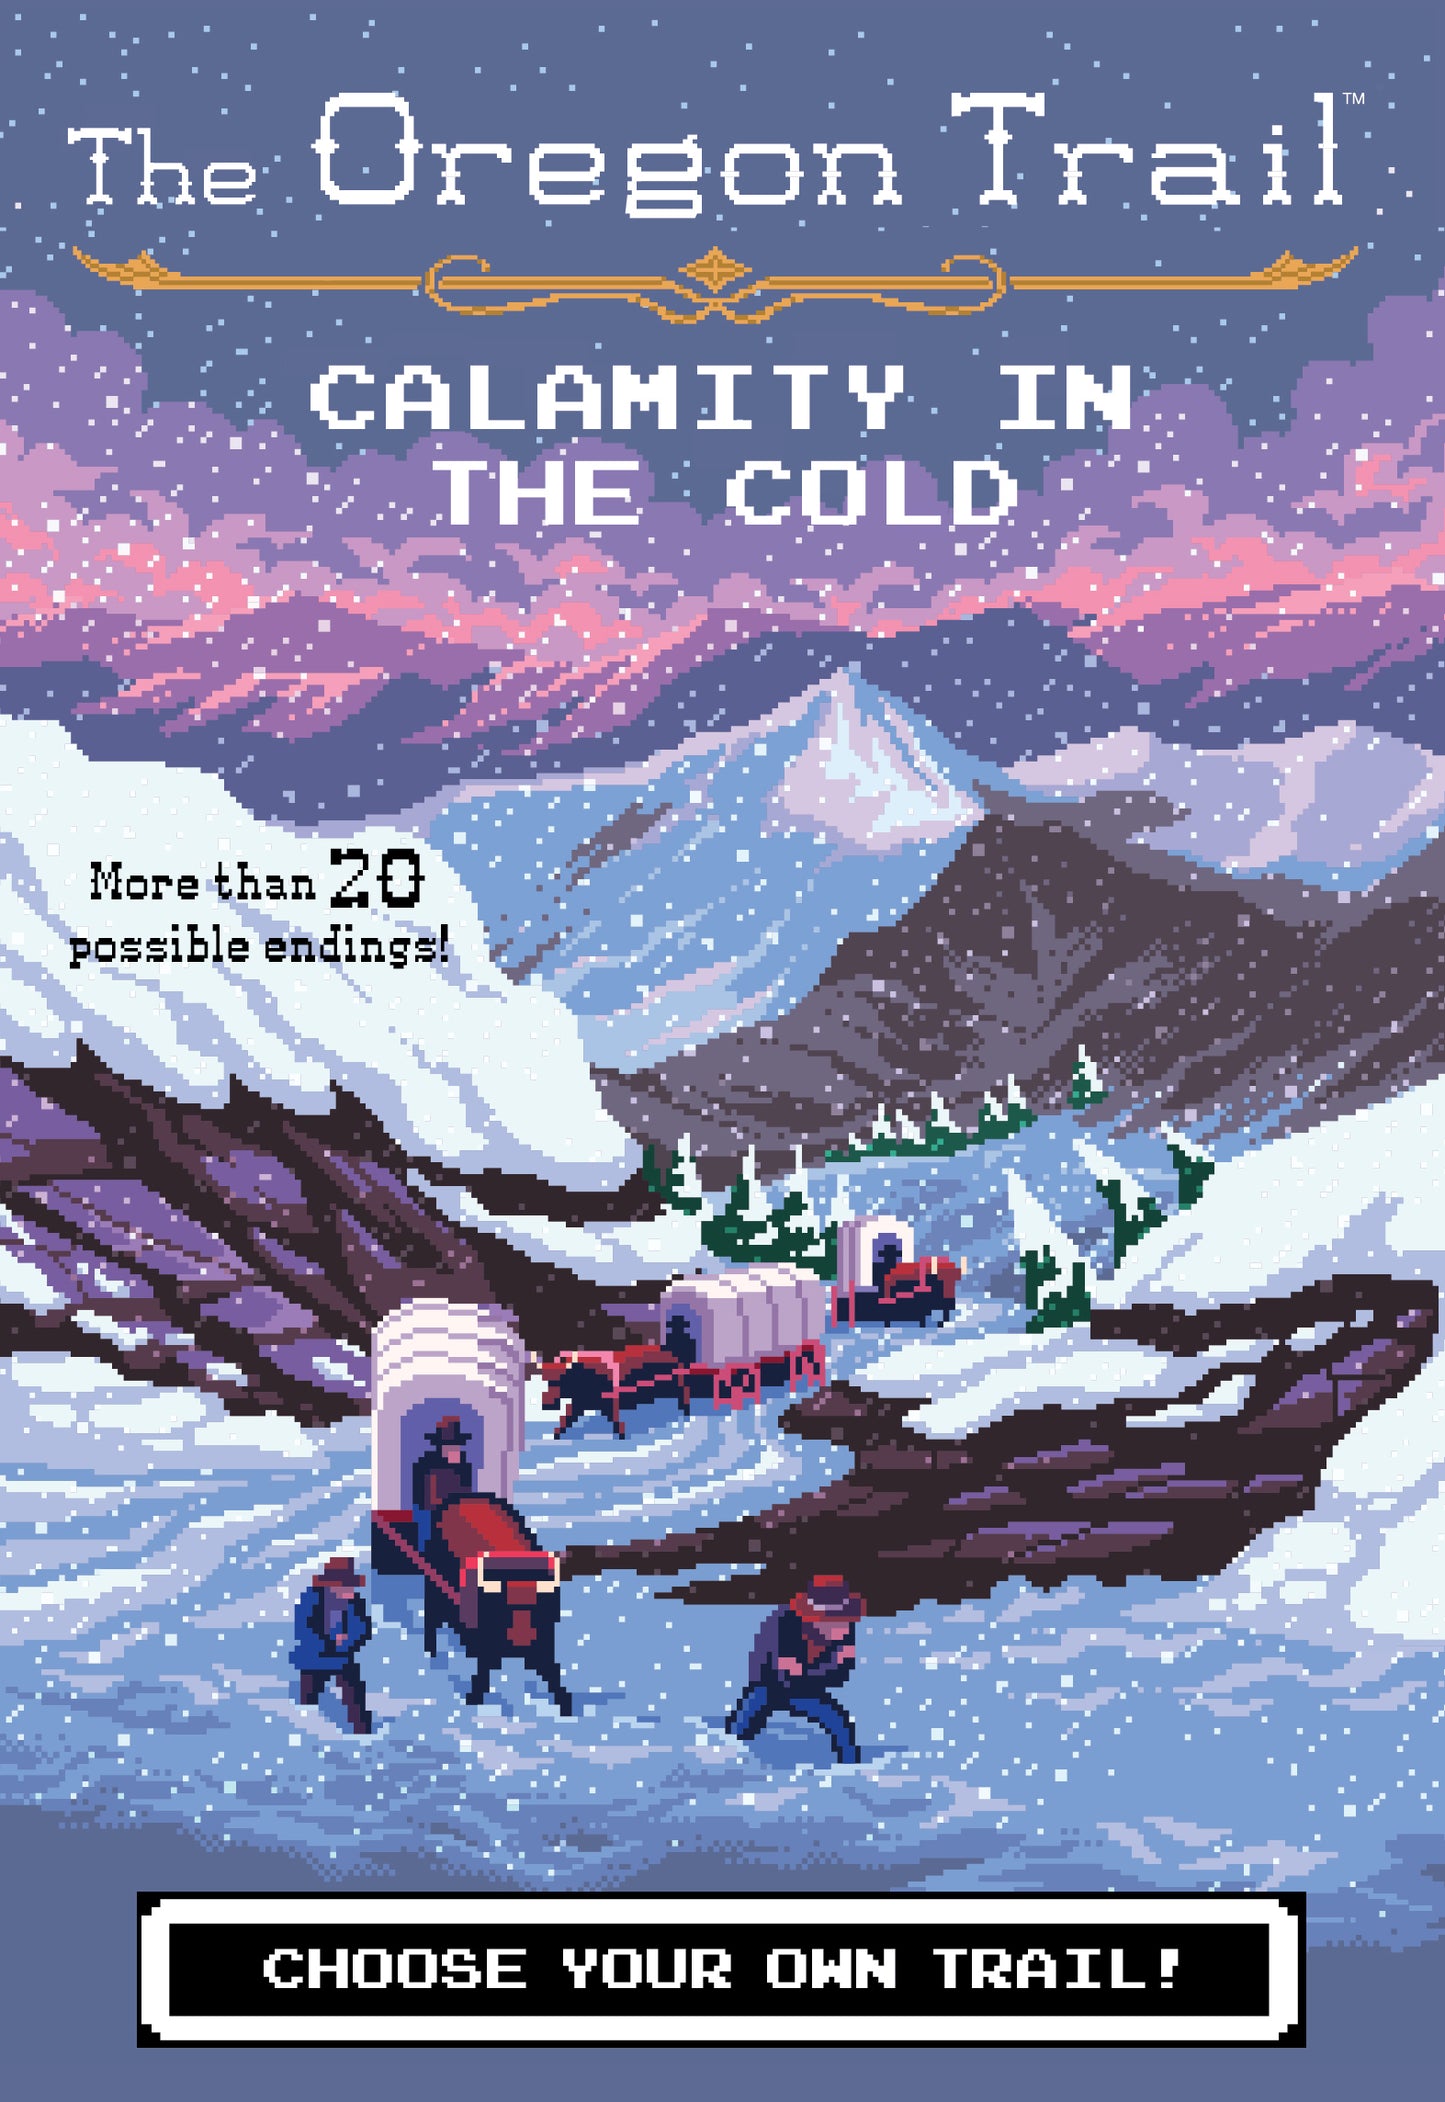 Book (Hardcover) - The Oregon Trail: Calamity In The Cold